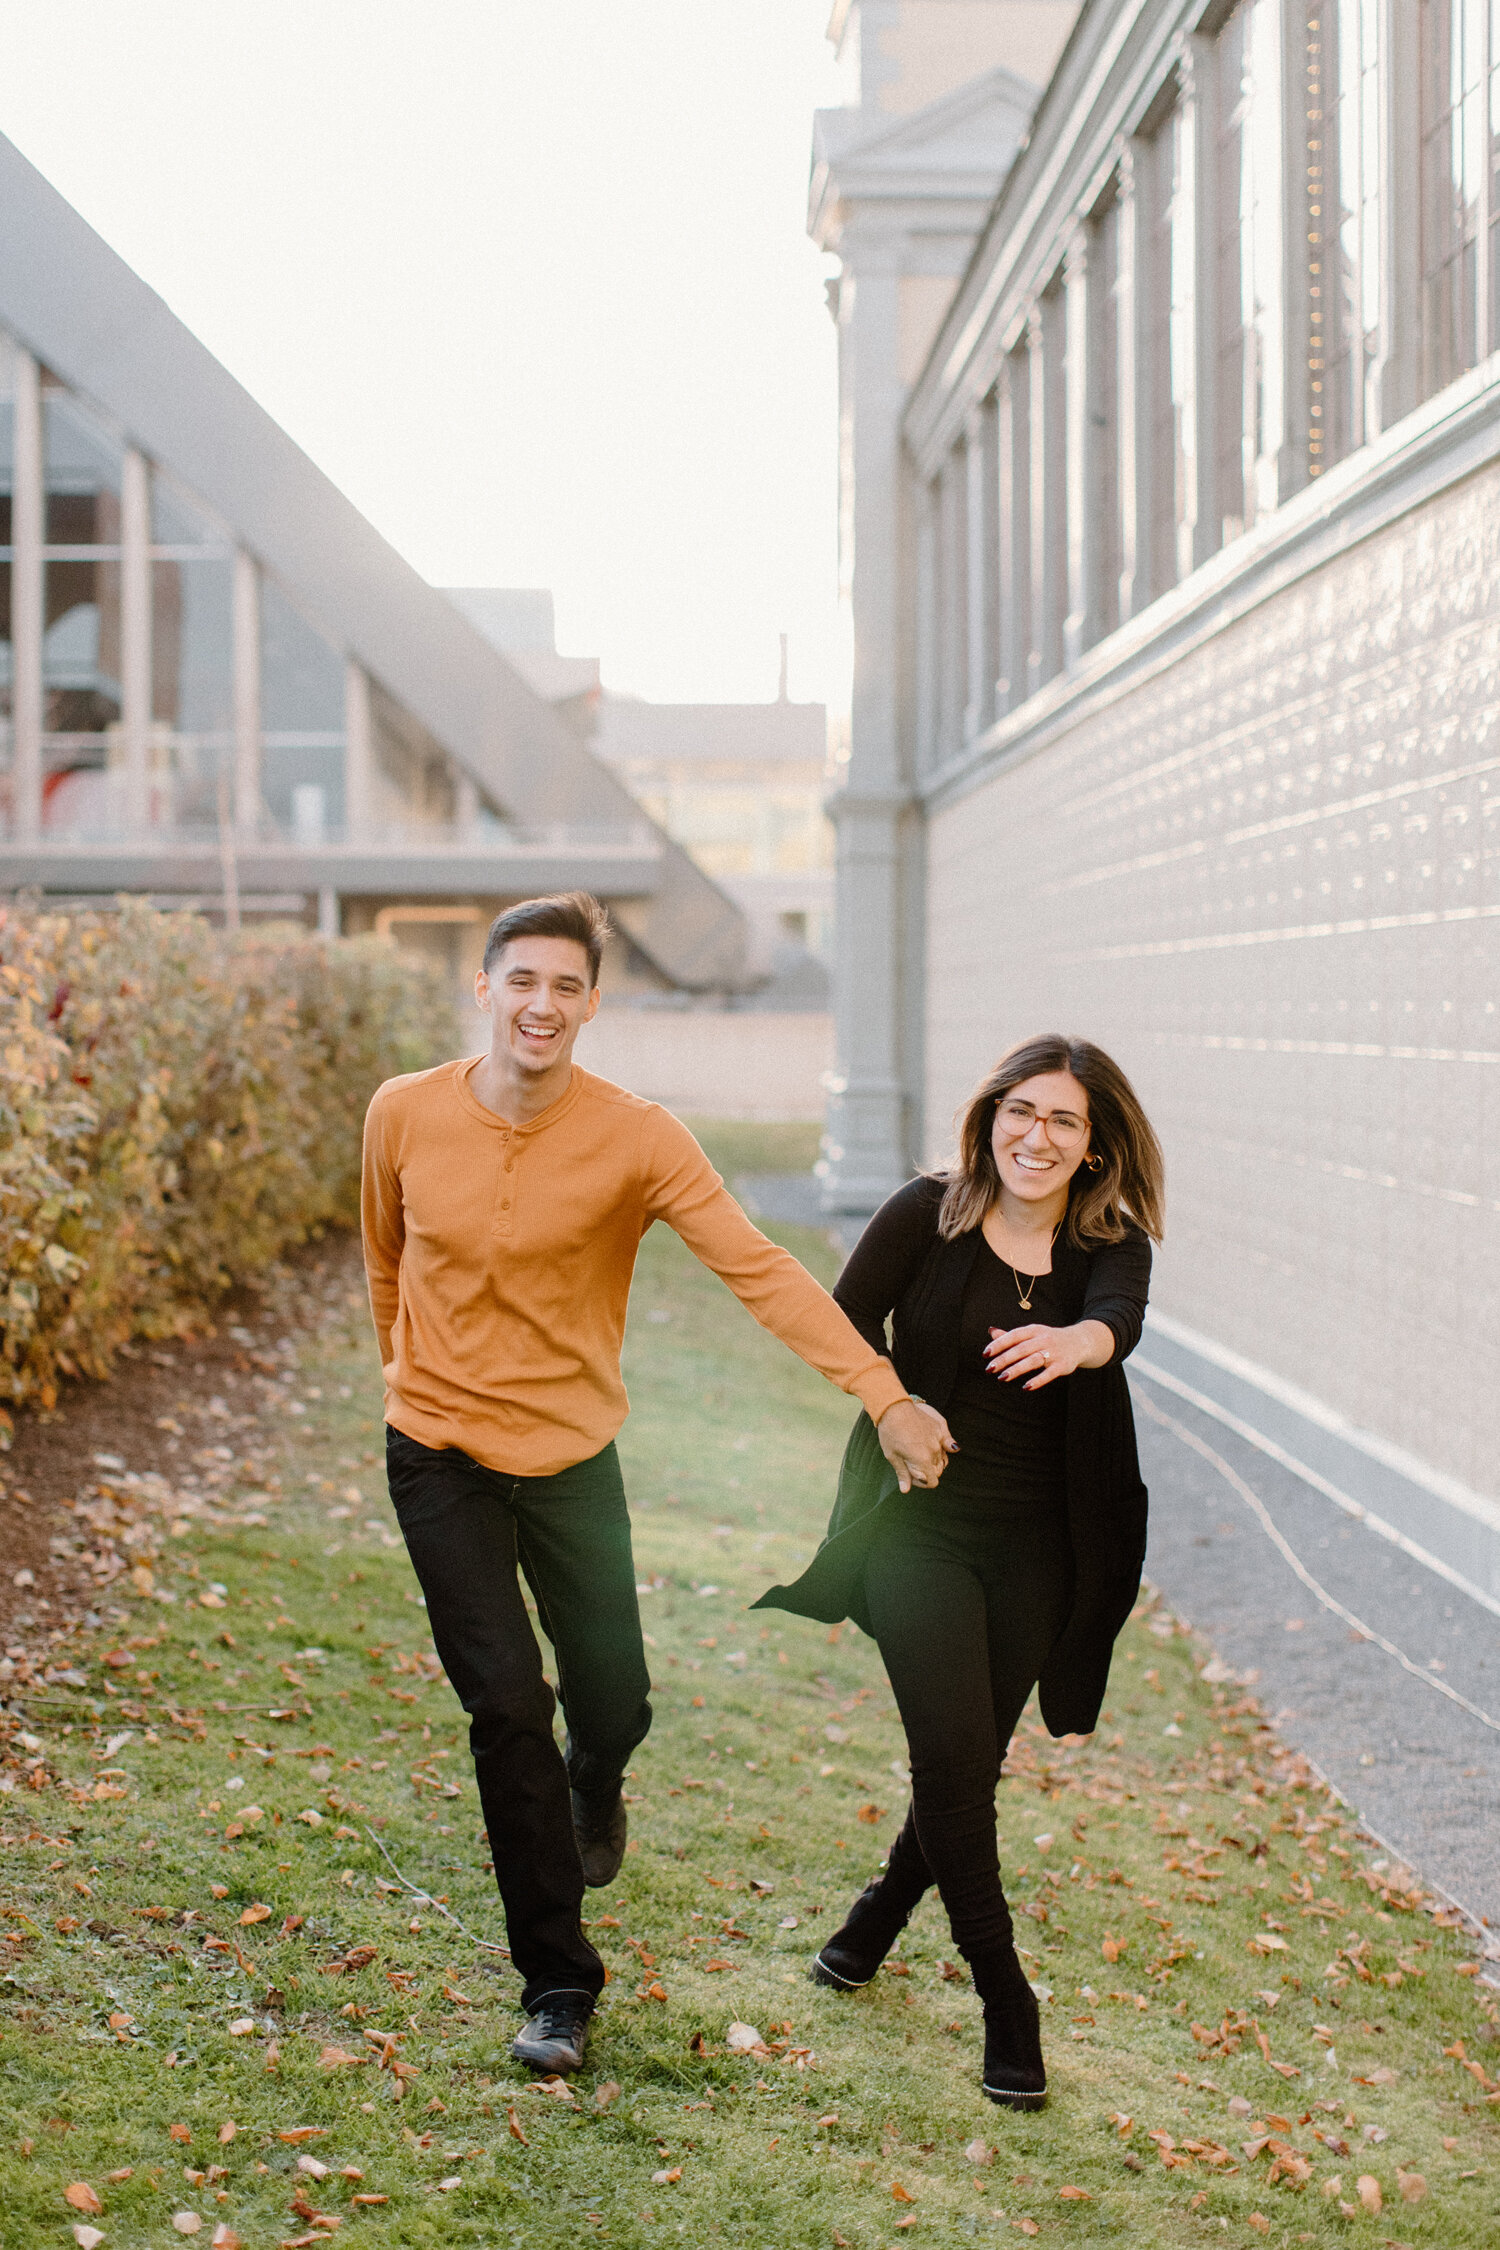  While running beside the Ottawa, Ontario Horticulture Building, Chelsea Mason Photography captures this couple running and holding hands playfully. orange and black family photo outfit colors couple playfully holding hands womens thick rimmed oversi